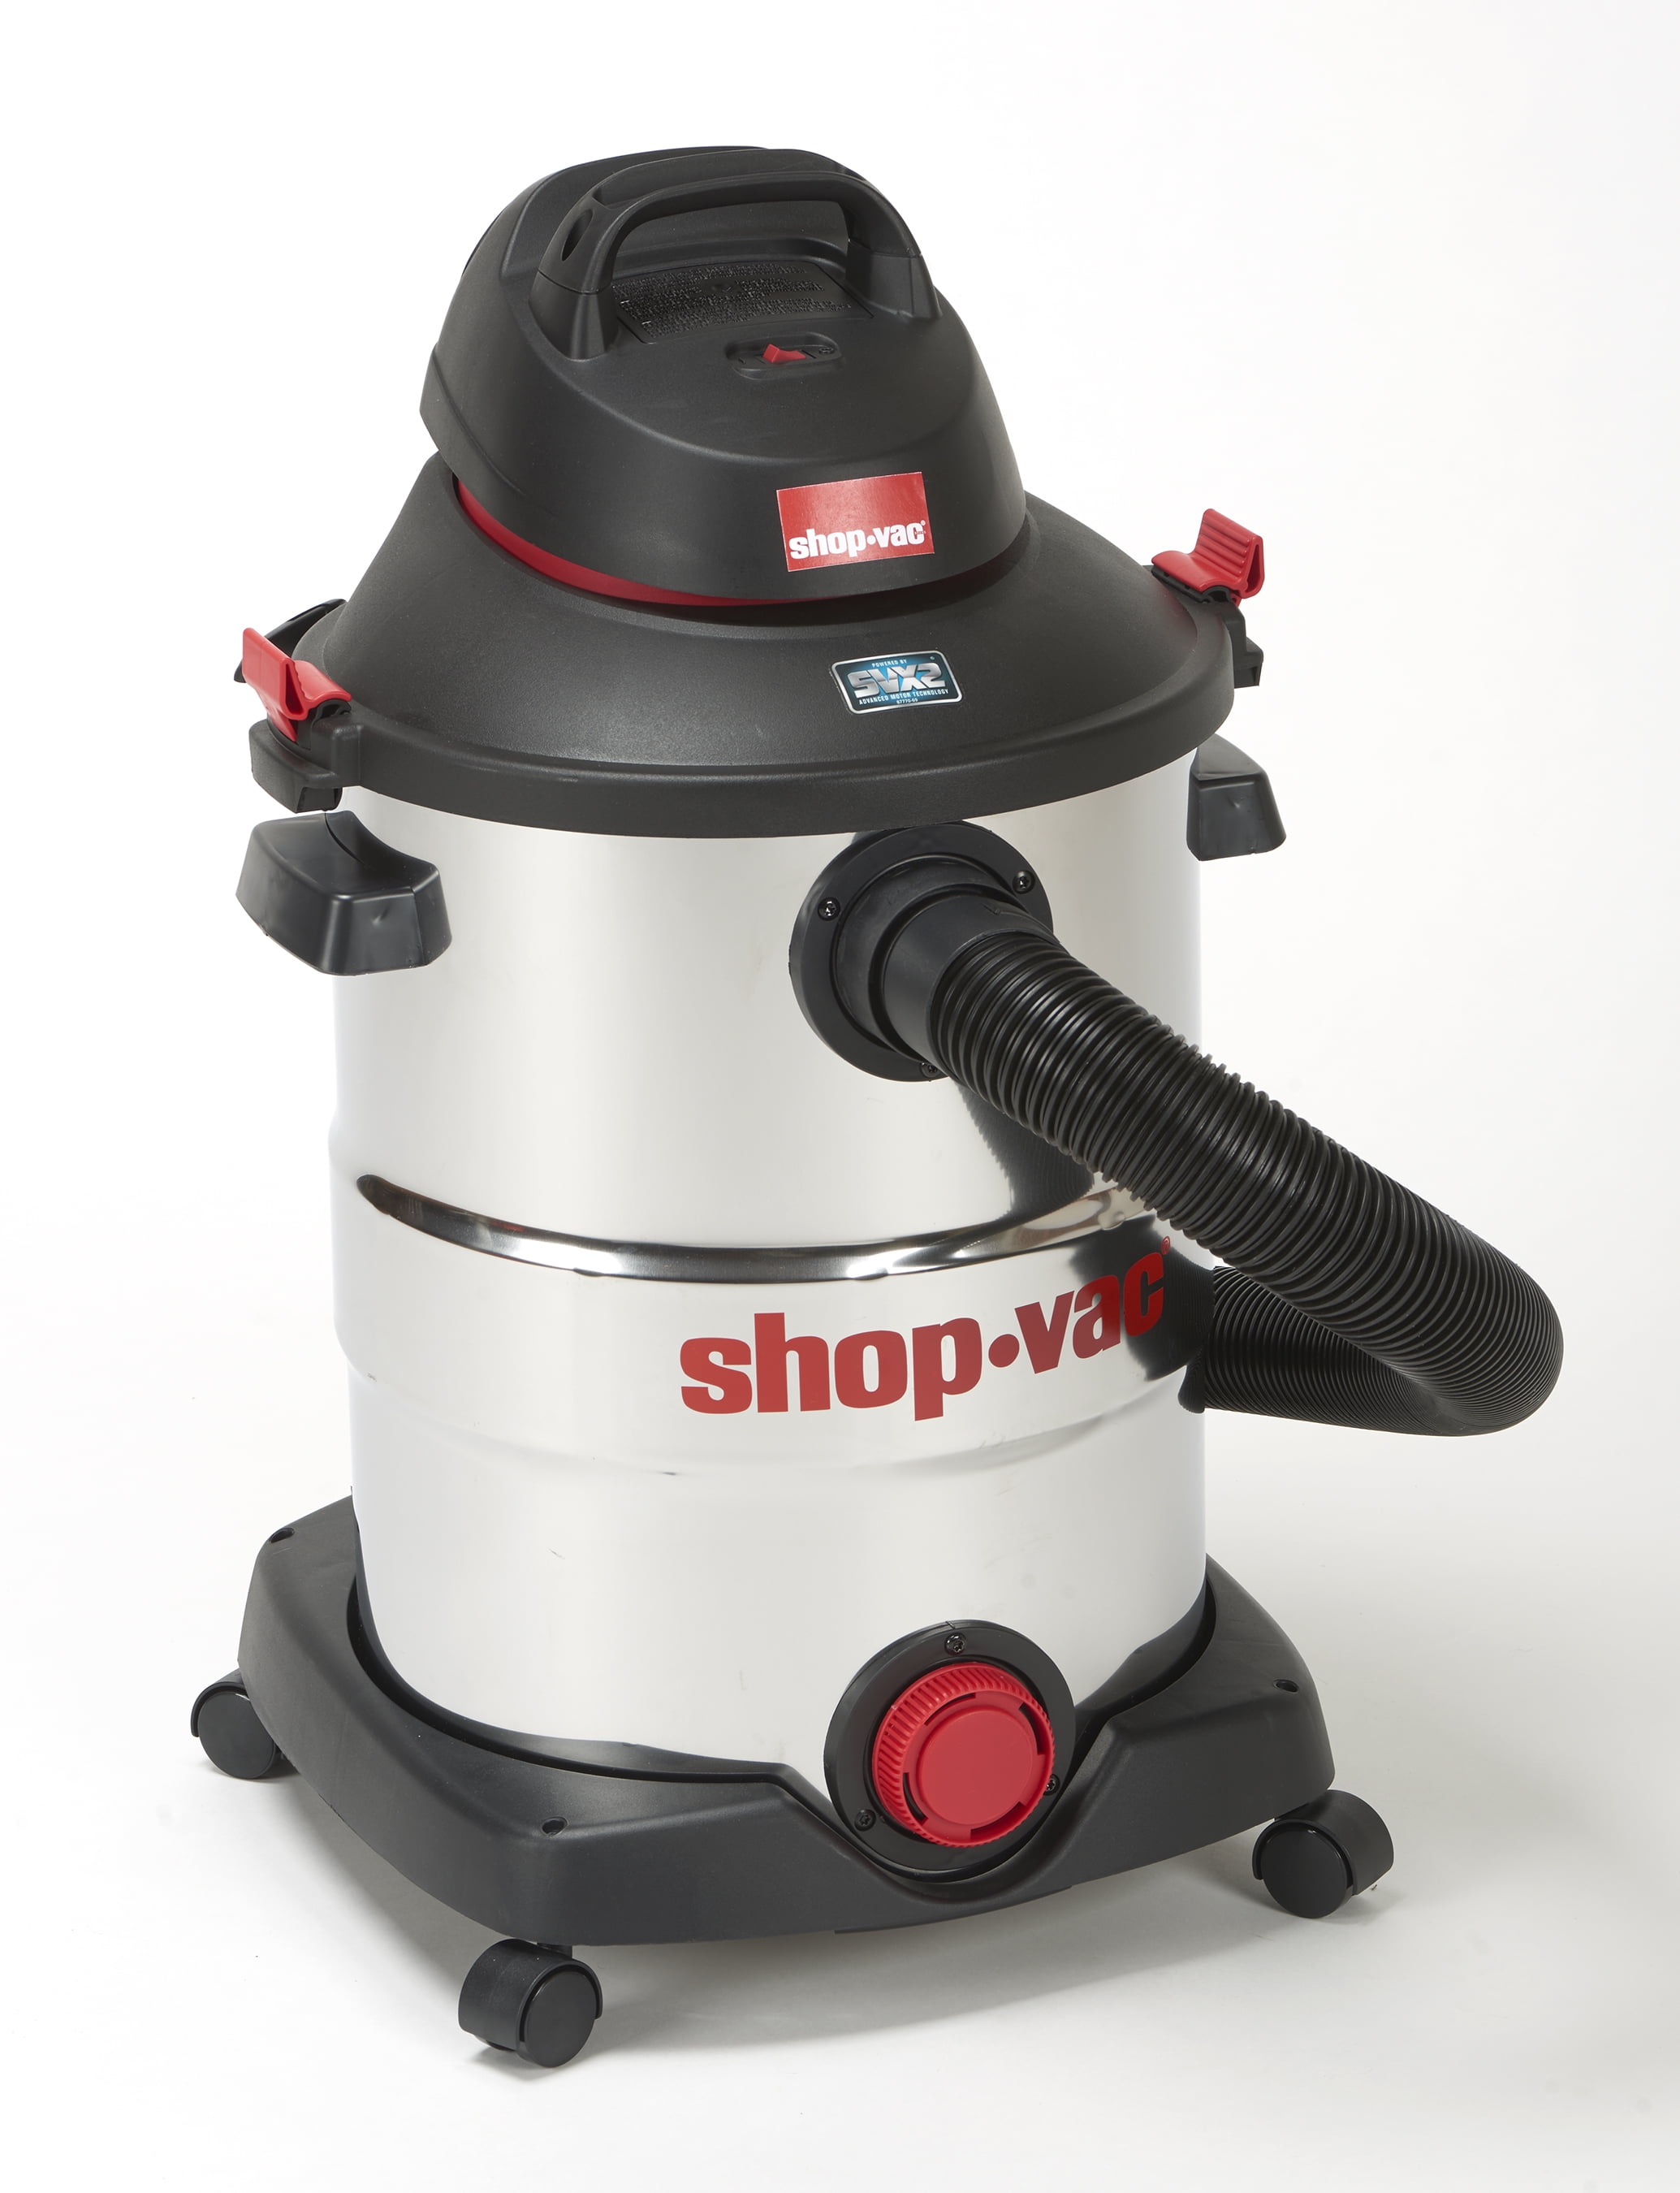 Shop Vac - Cleaning supplies